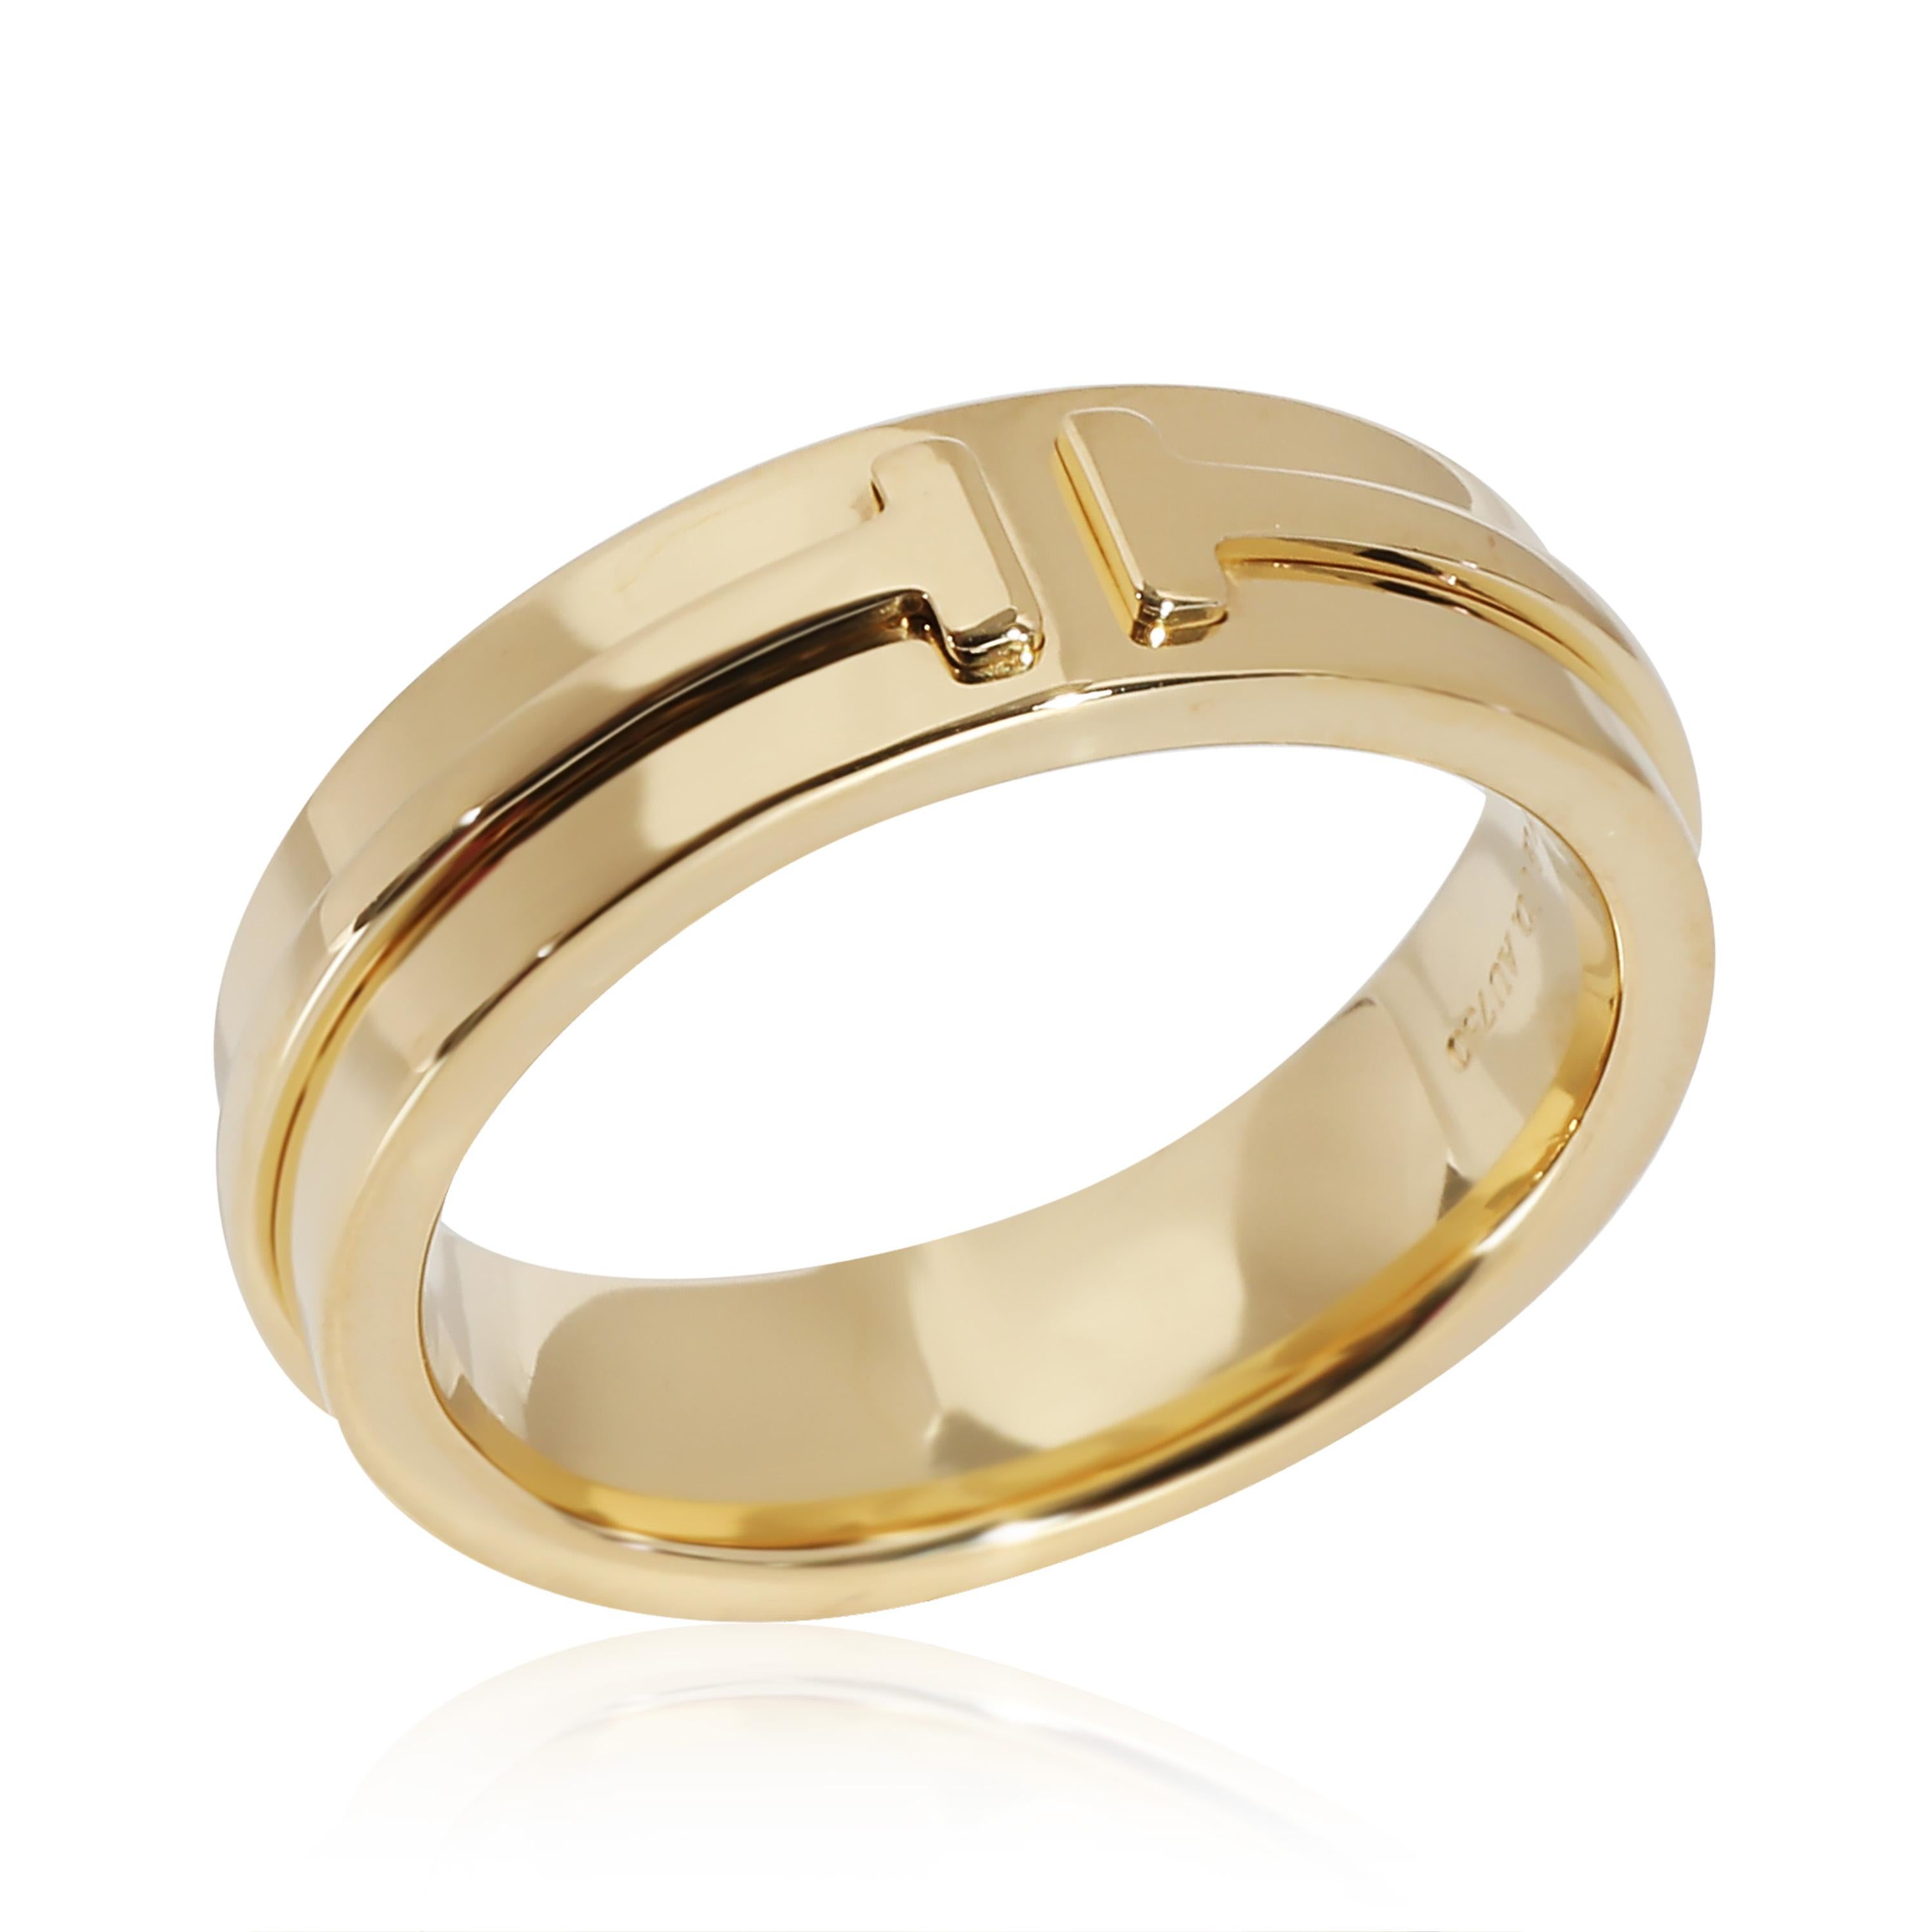 Tiffany & Co. Tiffany T Ring in 18K Yellow Gold In Excellent Condition For Sale In New York, NY